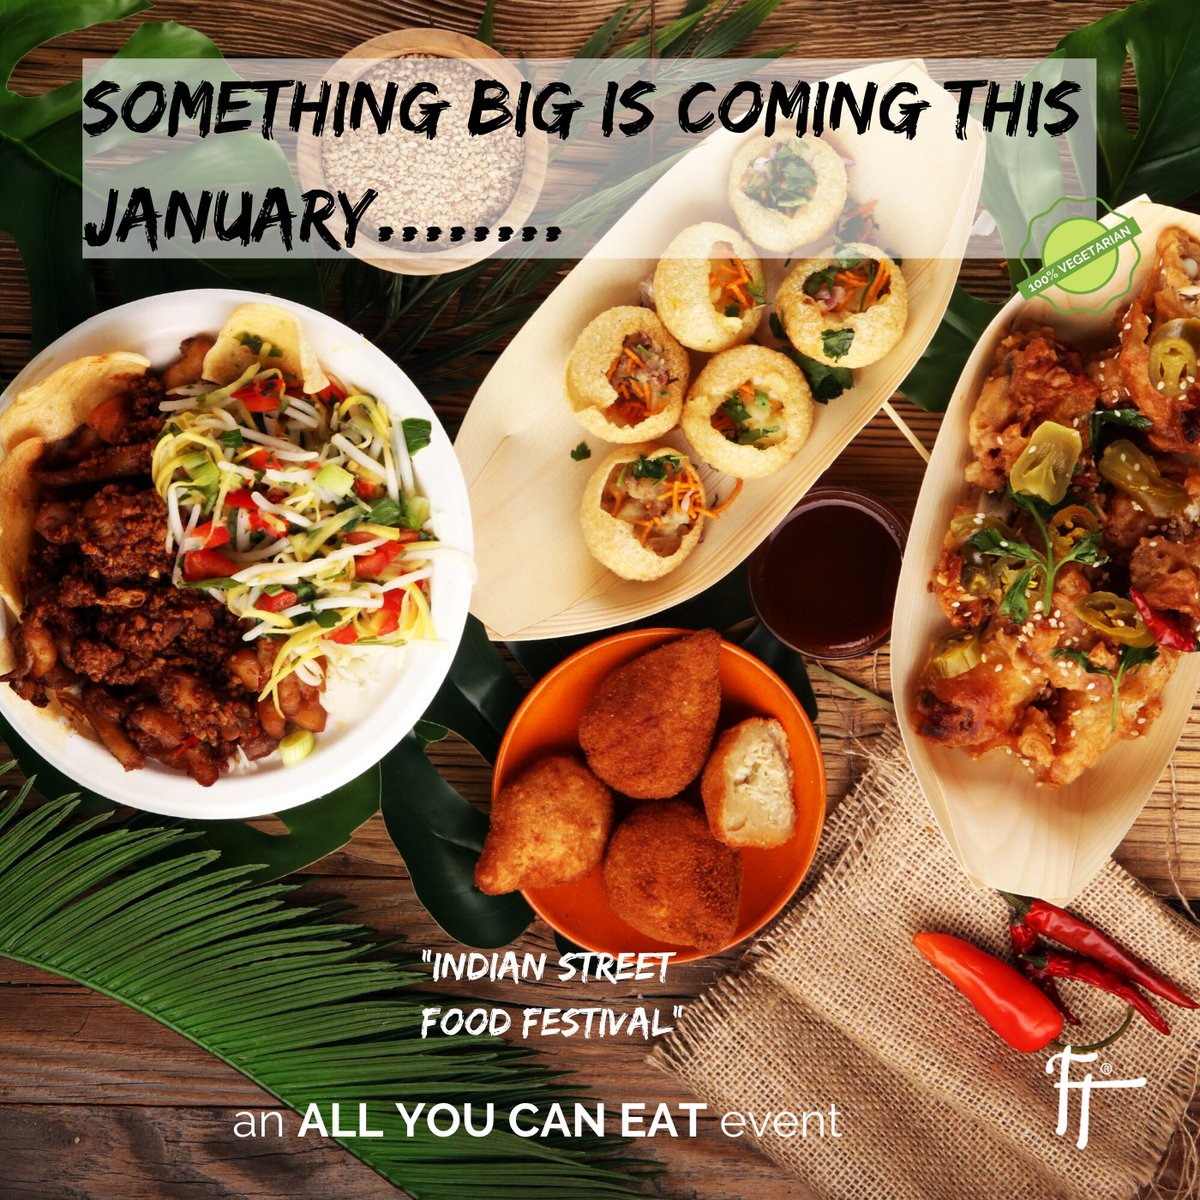 We are so excited by our next foodie festival!

Our first ever ALL YOU CAN EAT venture with the amazing Two Fat Indians Food Trucks. Stay tuned to our FB page as all details are released about this not to be missed January event

bit.ly/32Hksdu
#foodies #melbournefoodies